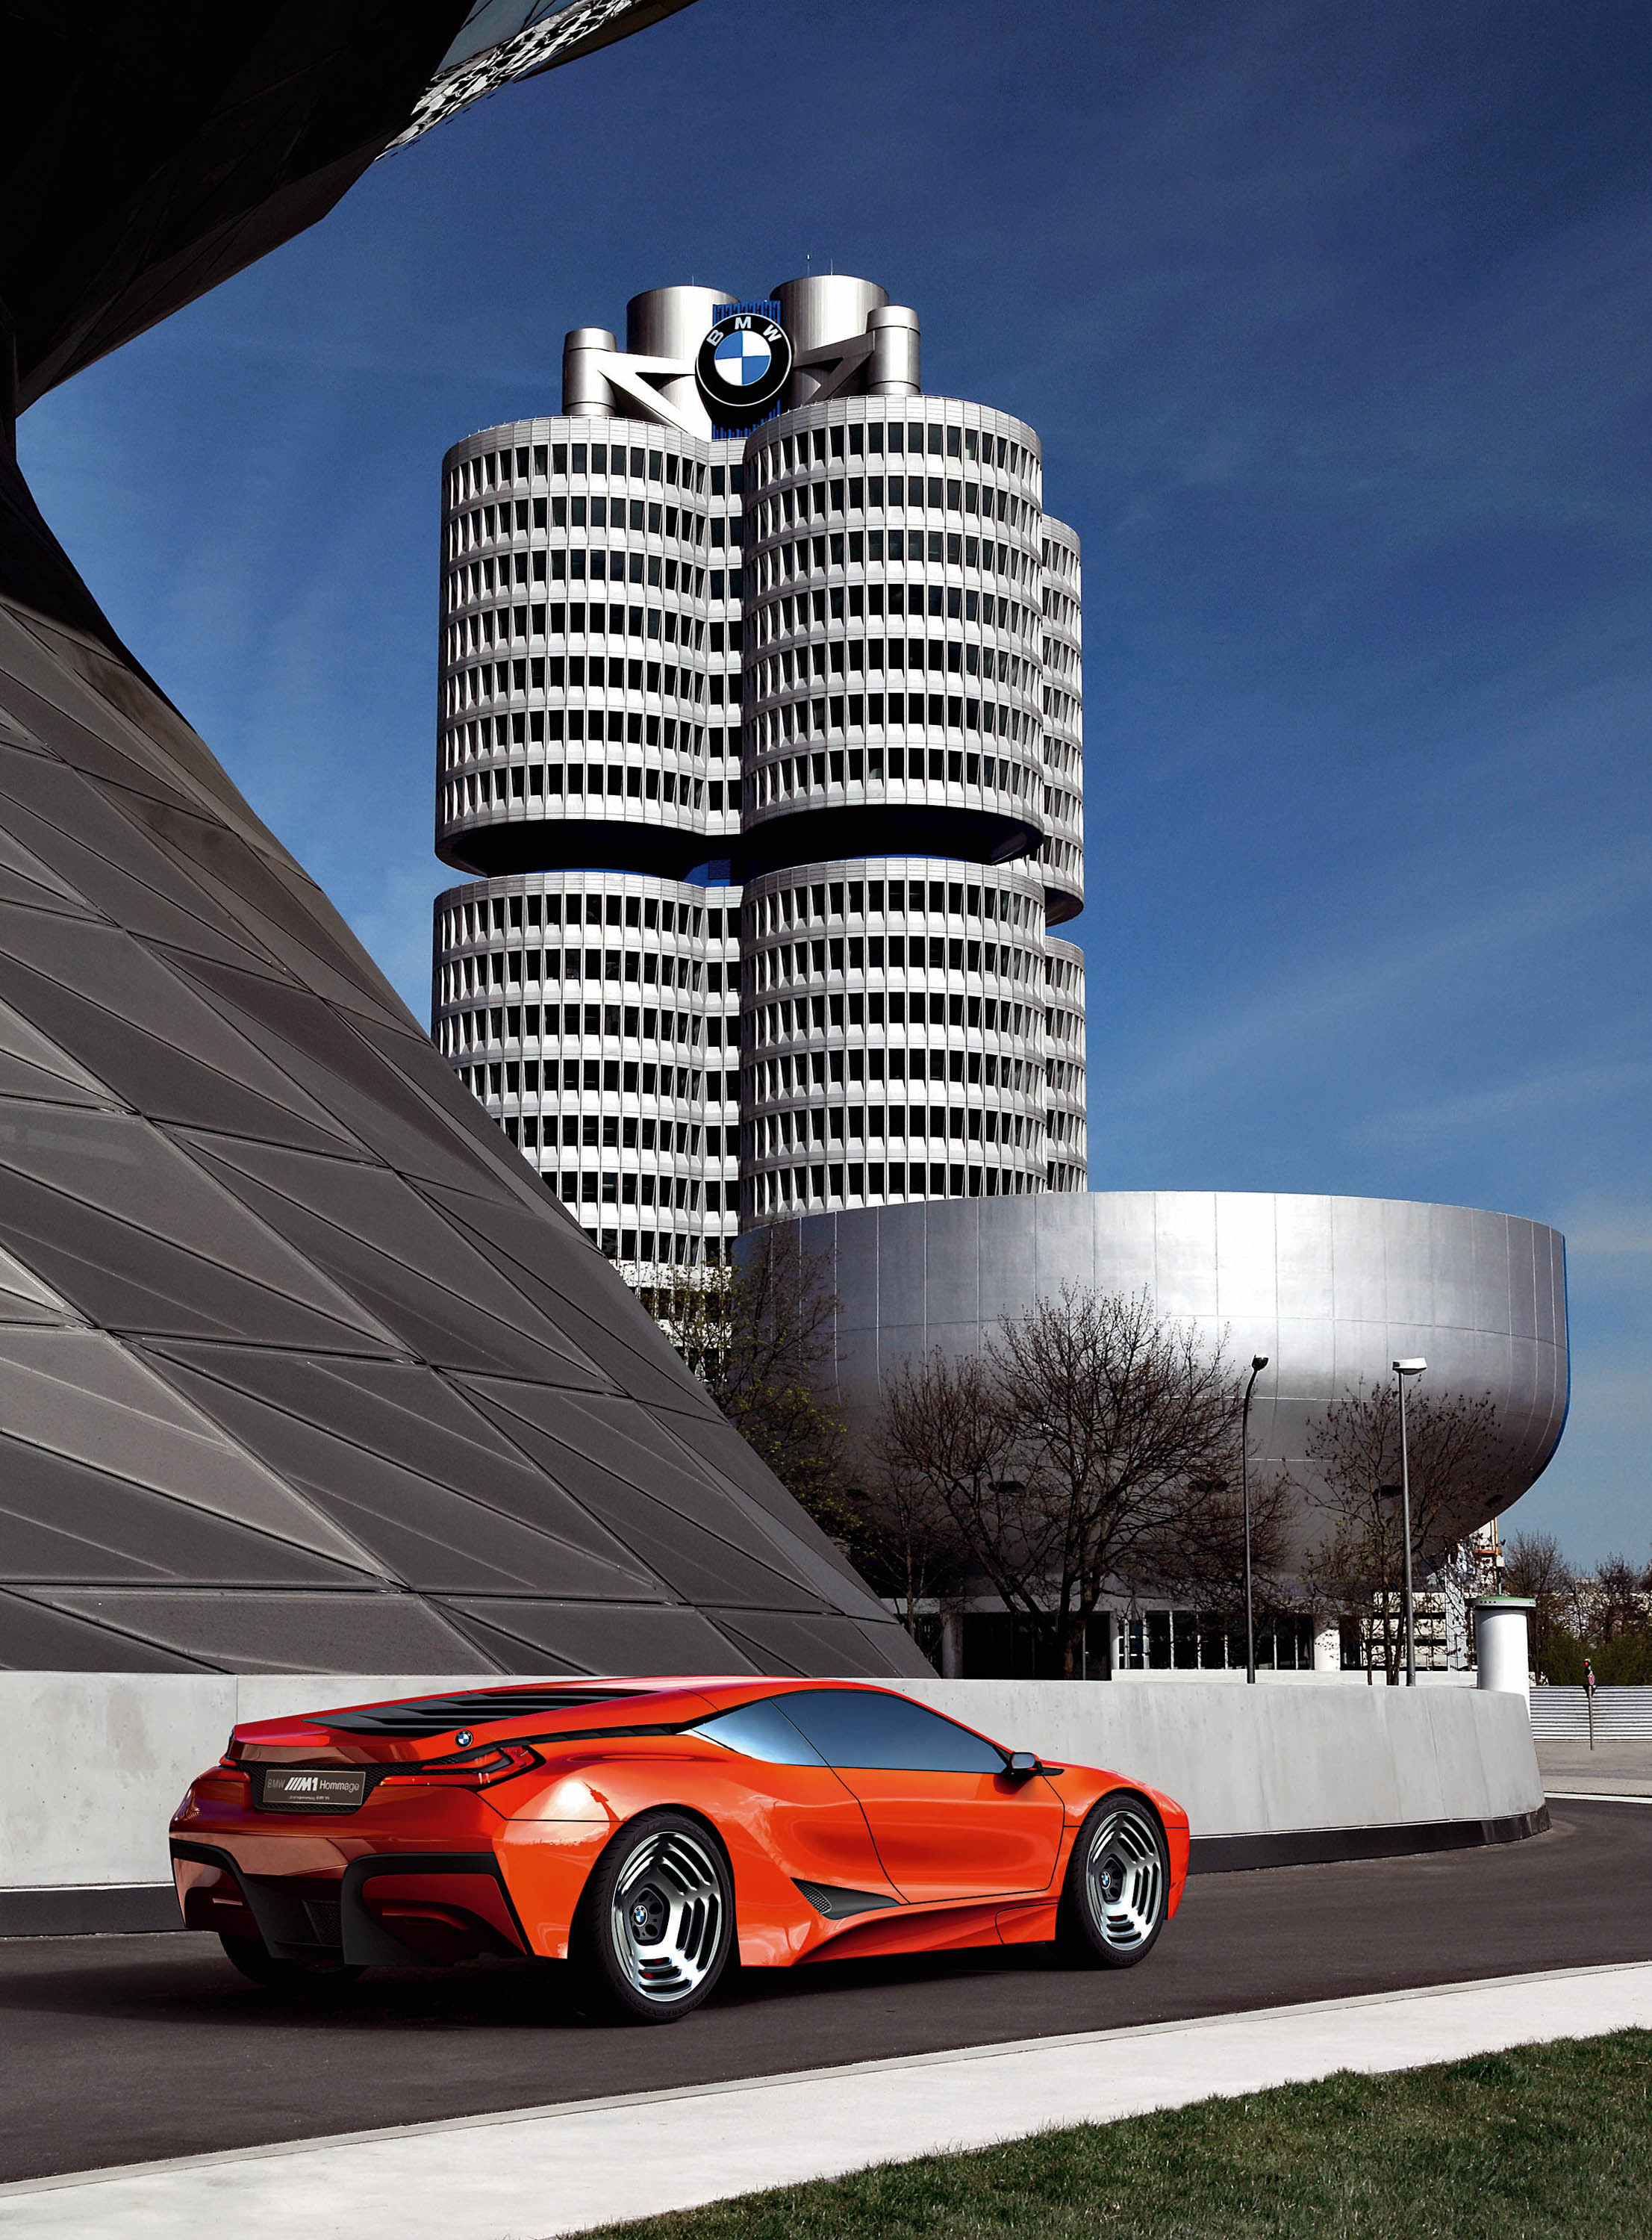 Cars Wallpapers on Bmw Concept Cars Hd Wallpaper   Cars   Trucks   636484